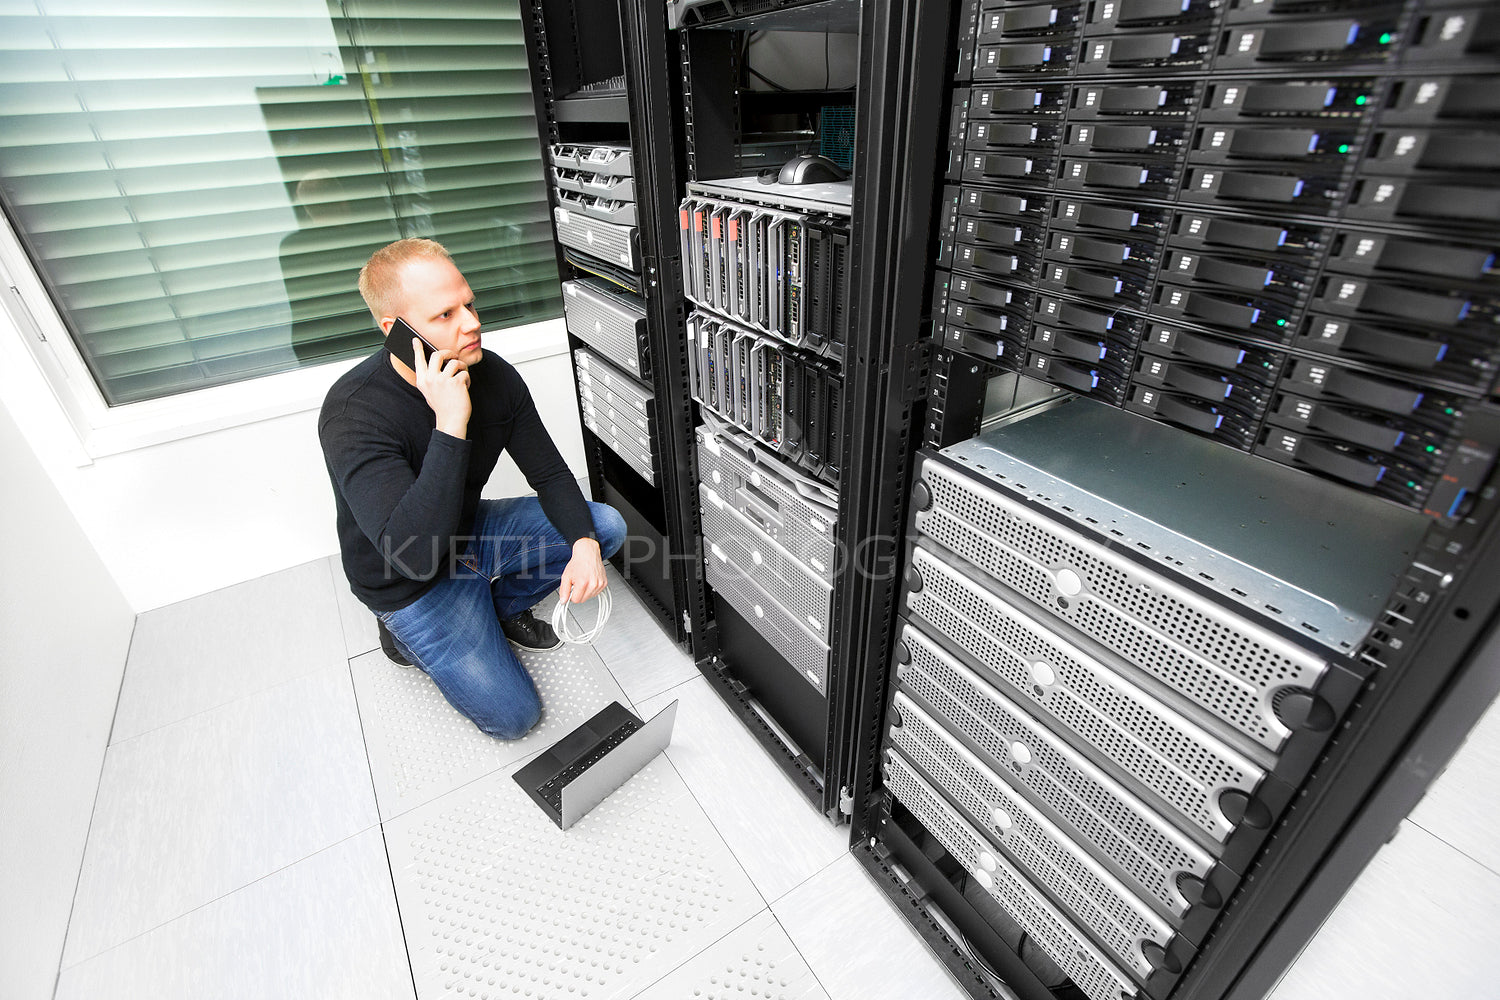 IT consultant solving problem with support in datacenter